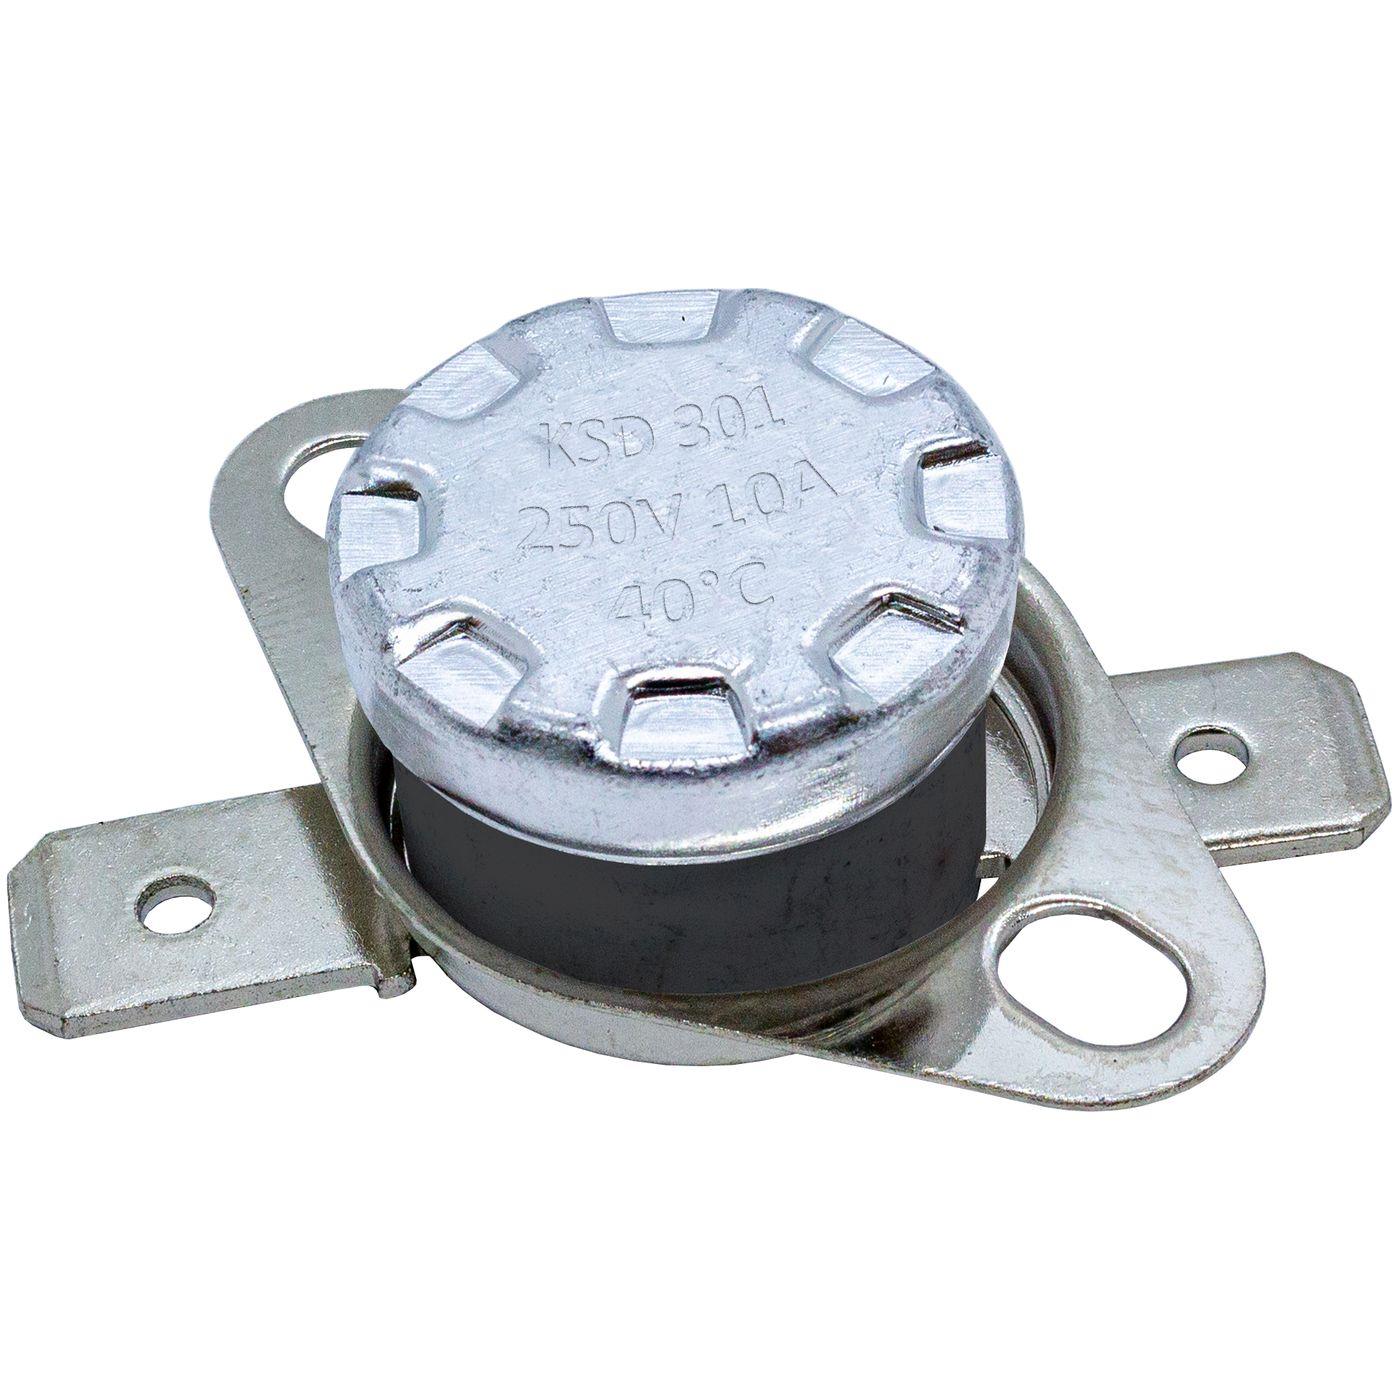 Thermal switch 40°C NO contact 250V 10A Temperature switch thermostat KSD301 Bimetal Thermal protection